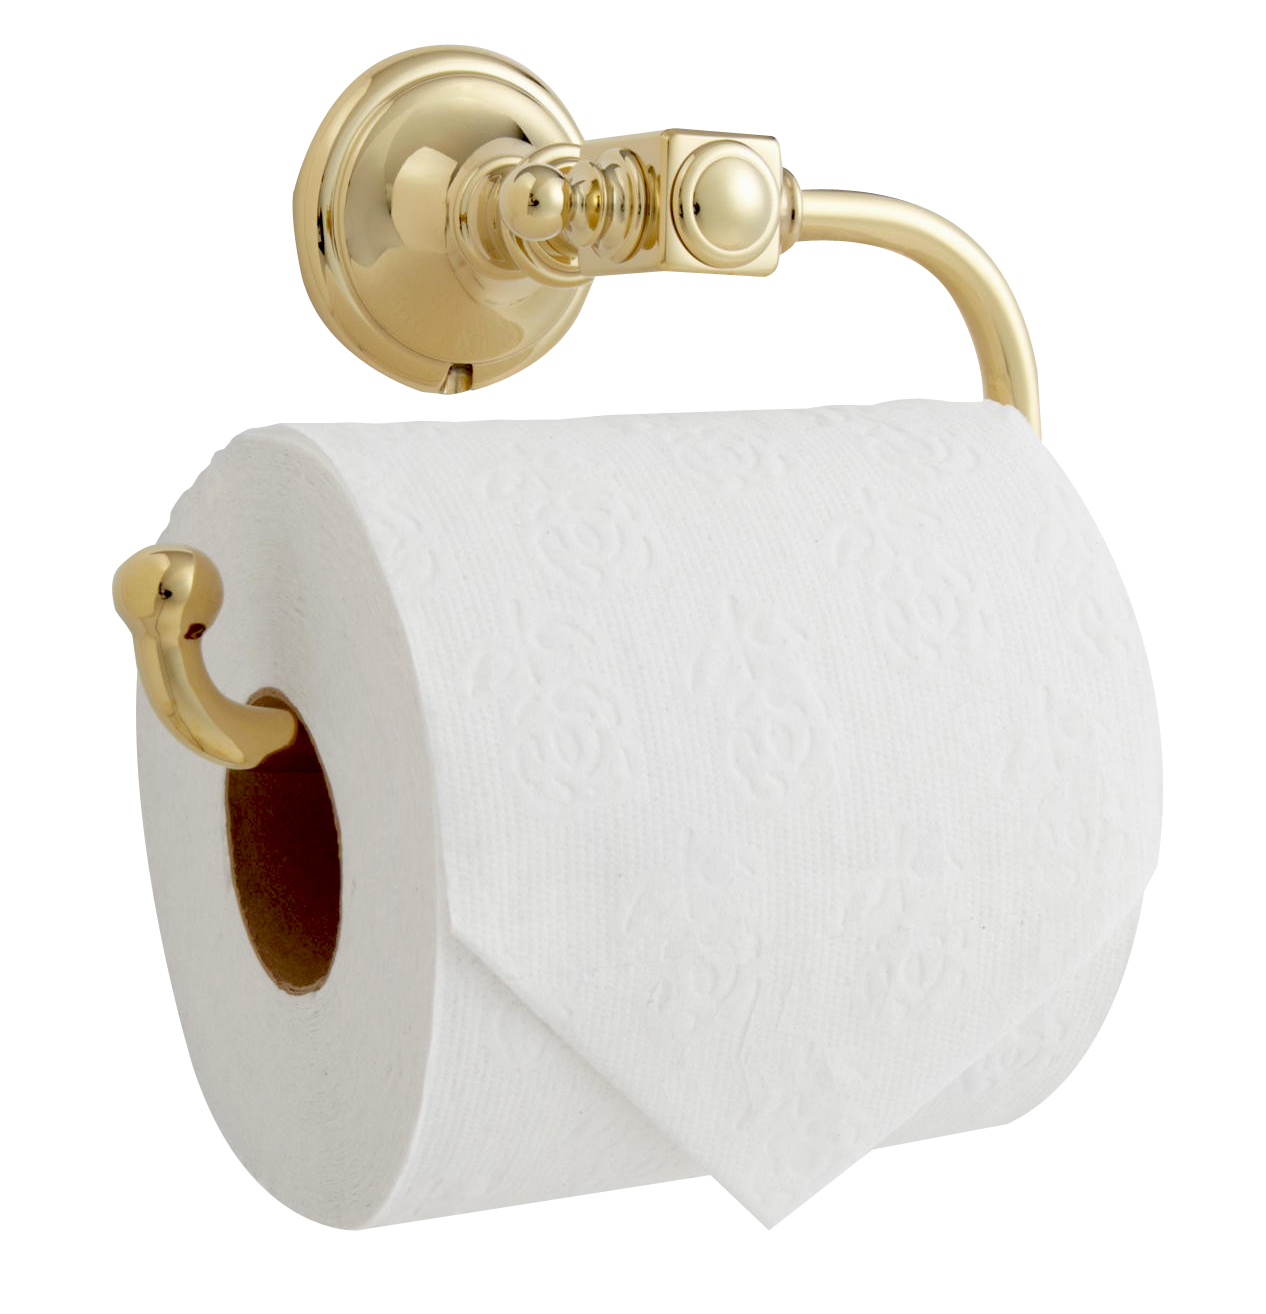 A Toilet Paper Roll On A Gold Holder